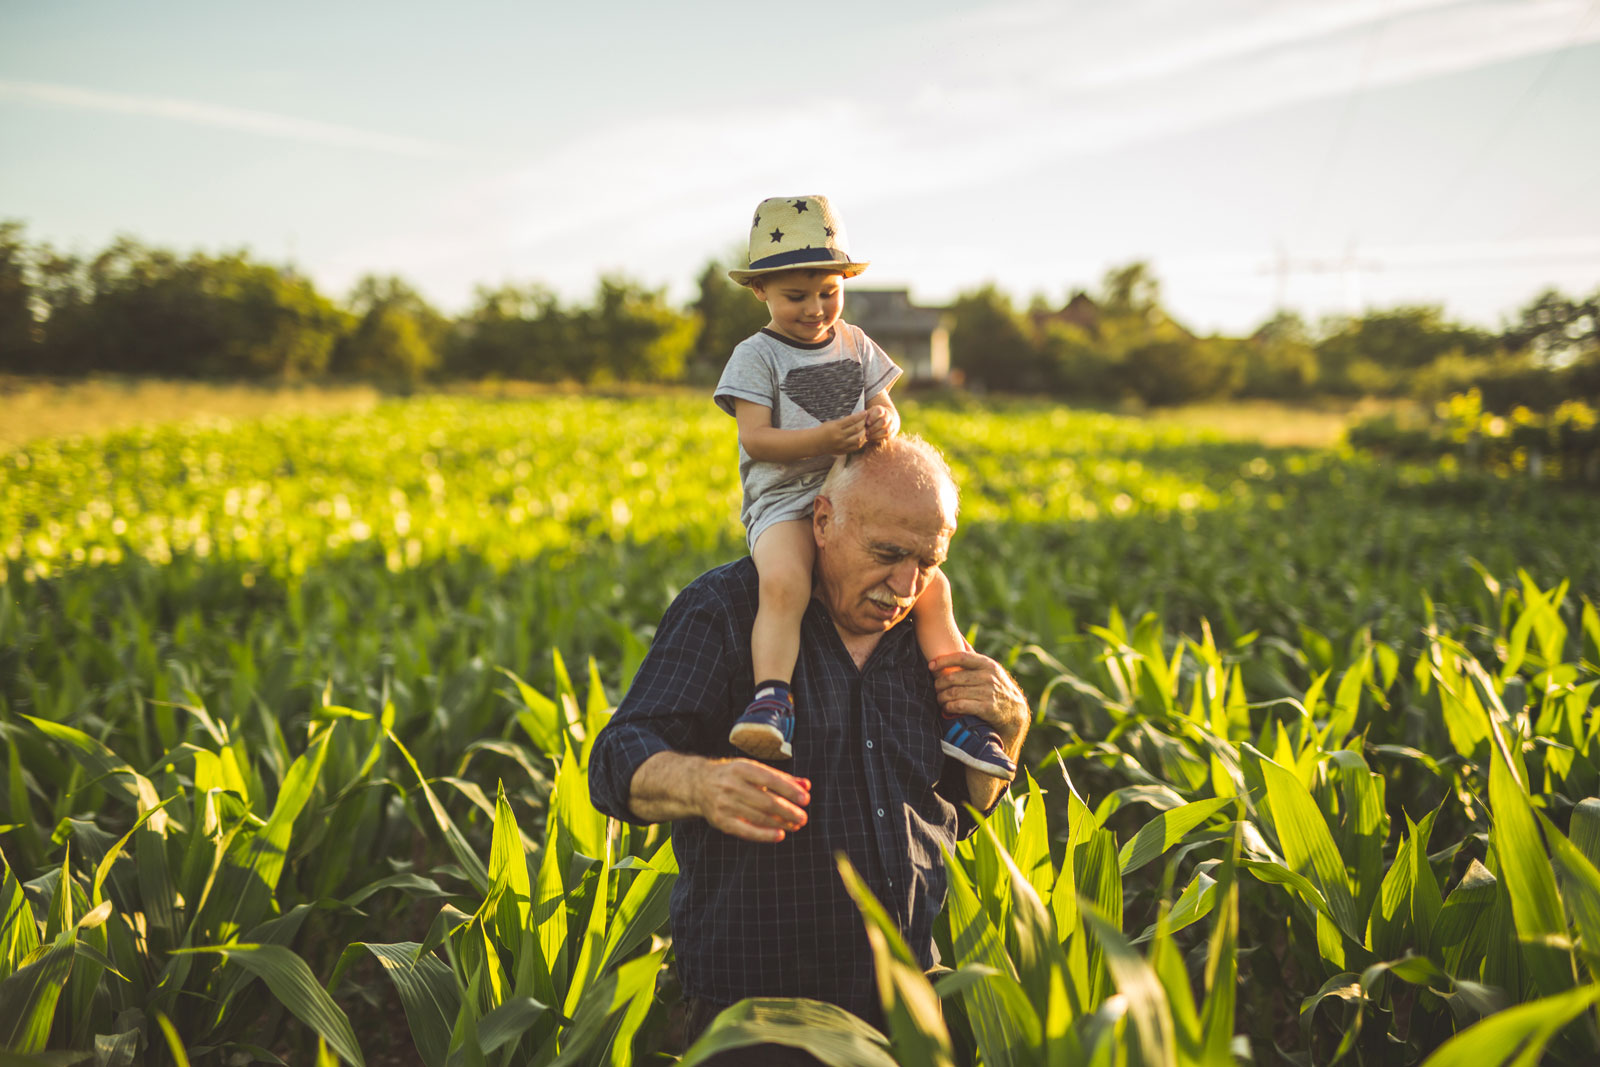 Grandfather carrying grandson on his shoulders in a corn field